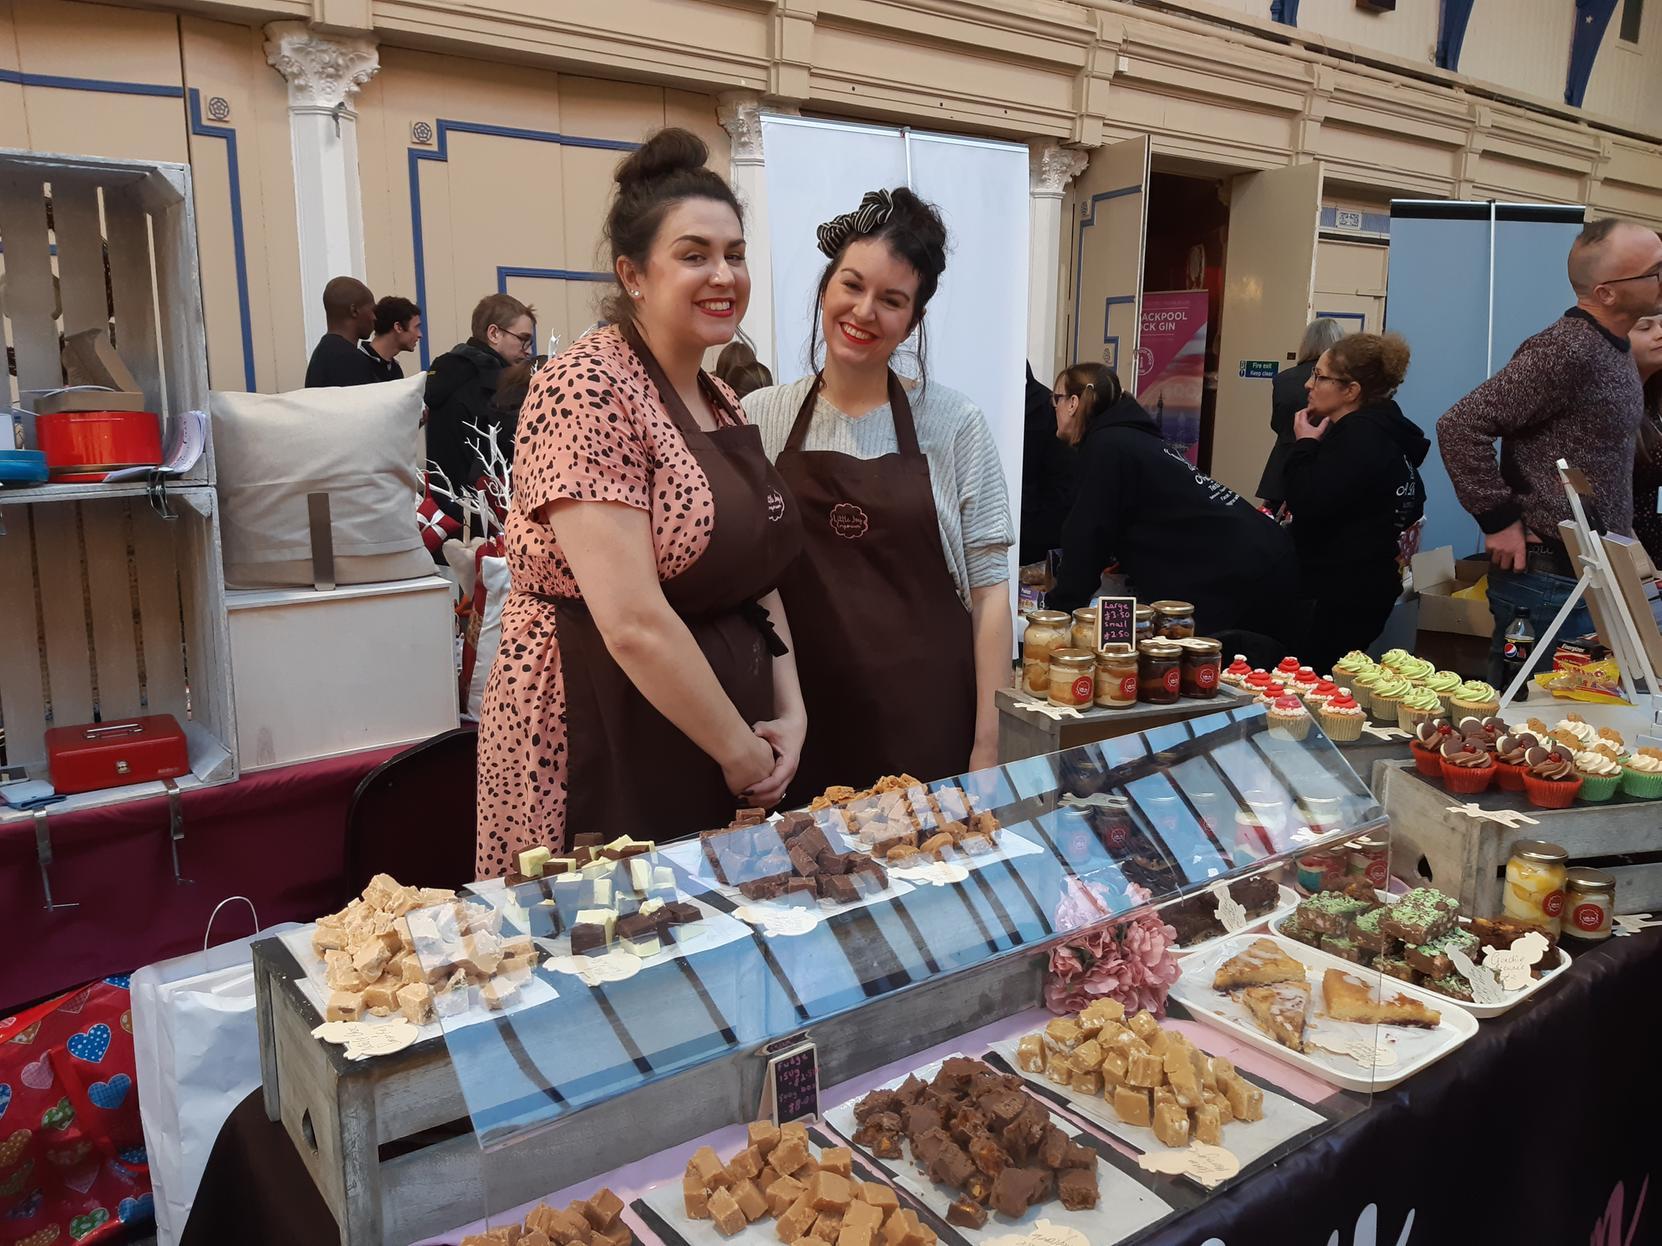 There was plenty for foodies to chose from, from home-made fudge, brownies and cakes to craft beers and gins.